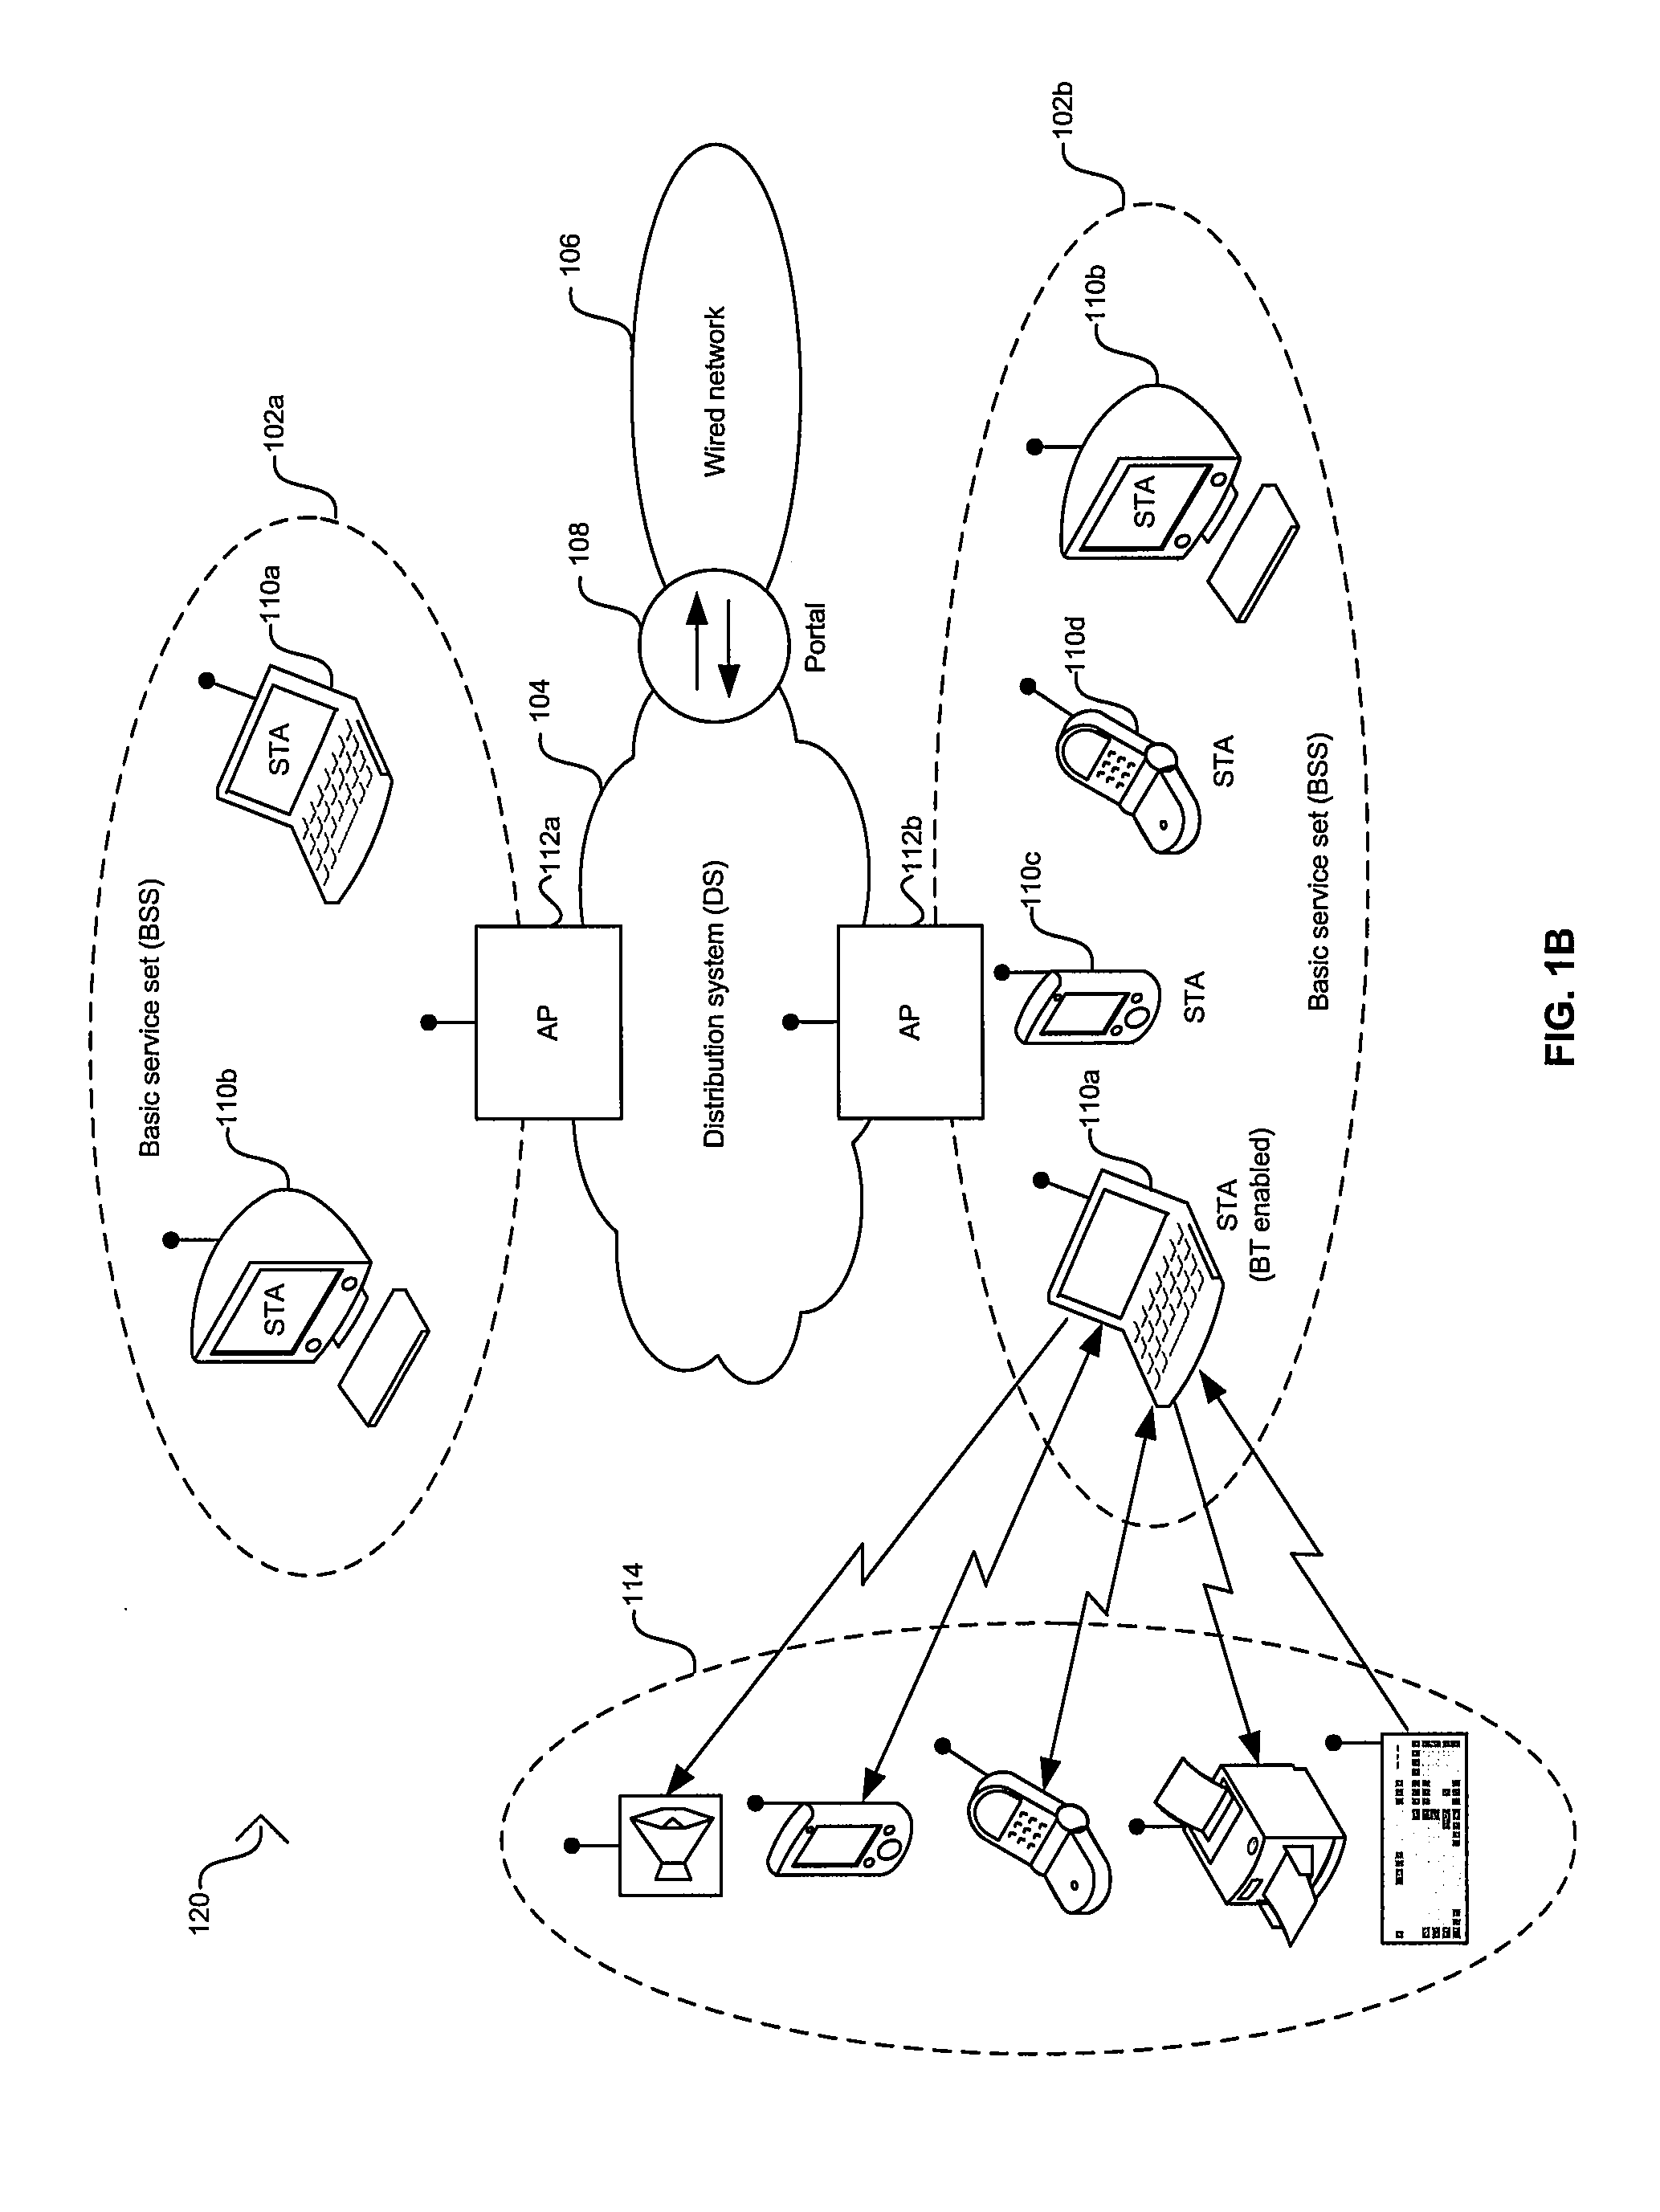 Method and system for a shared antenna control using the output of a voice activity detector